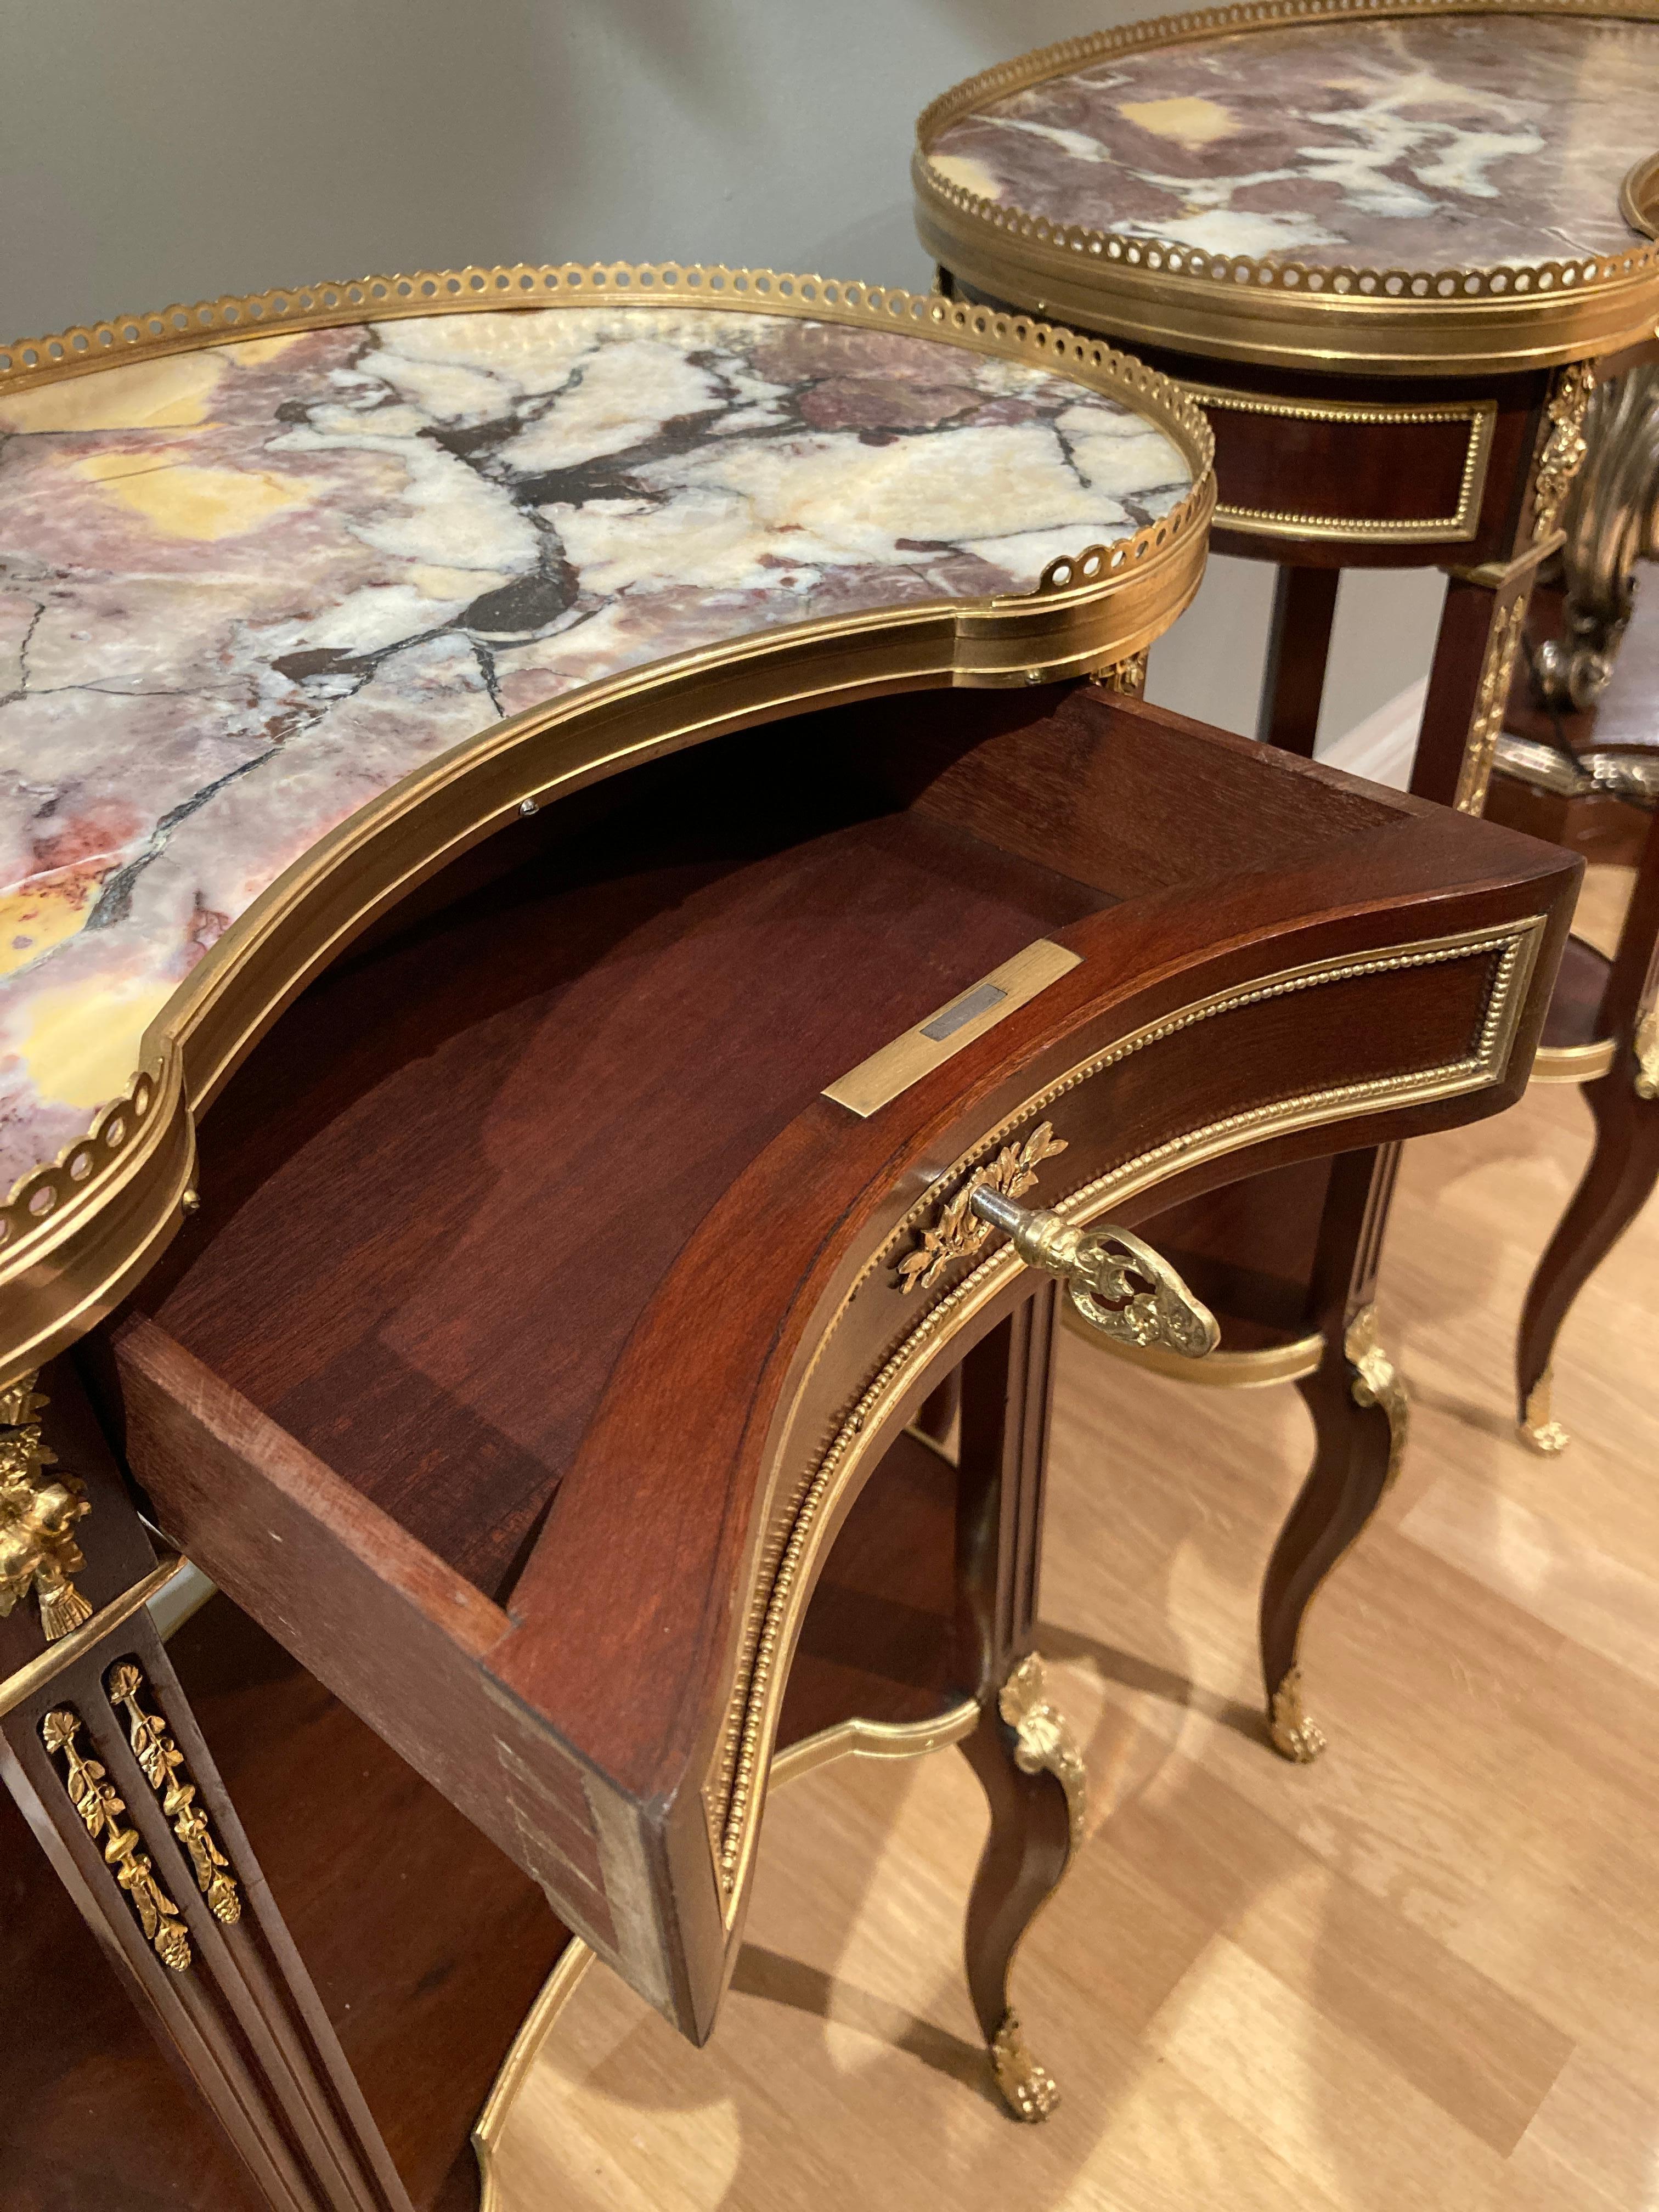 19th Century Pair of French Ormolu-Mounted Kidney-Shaped Occasional Tables For Sale 3